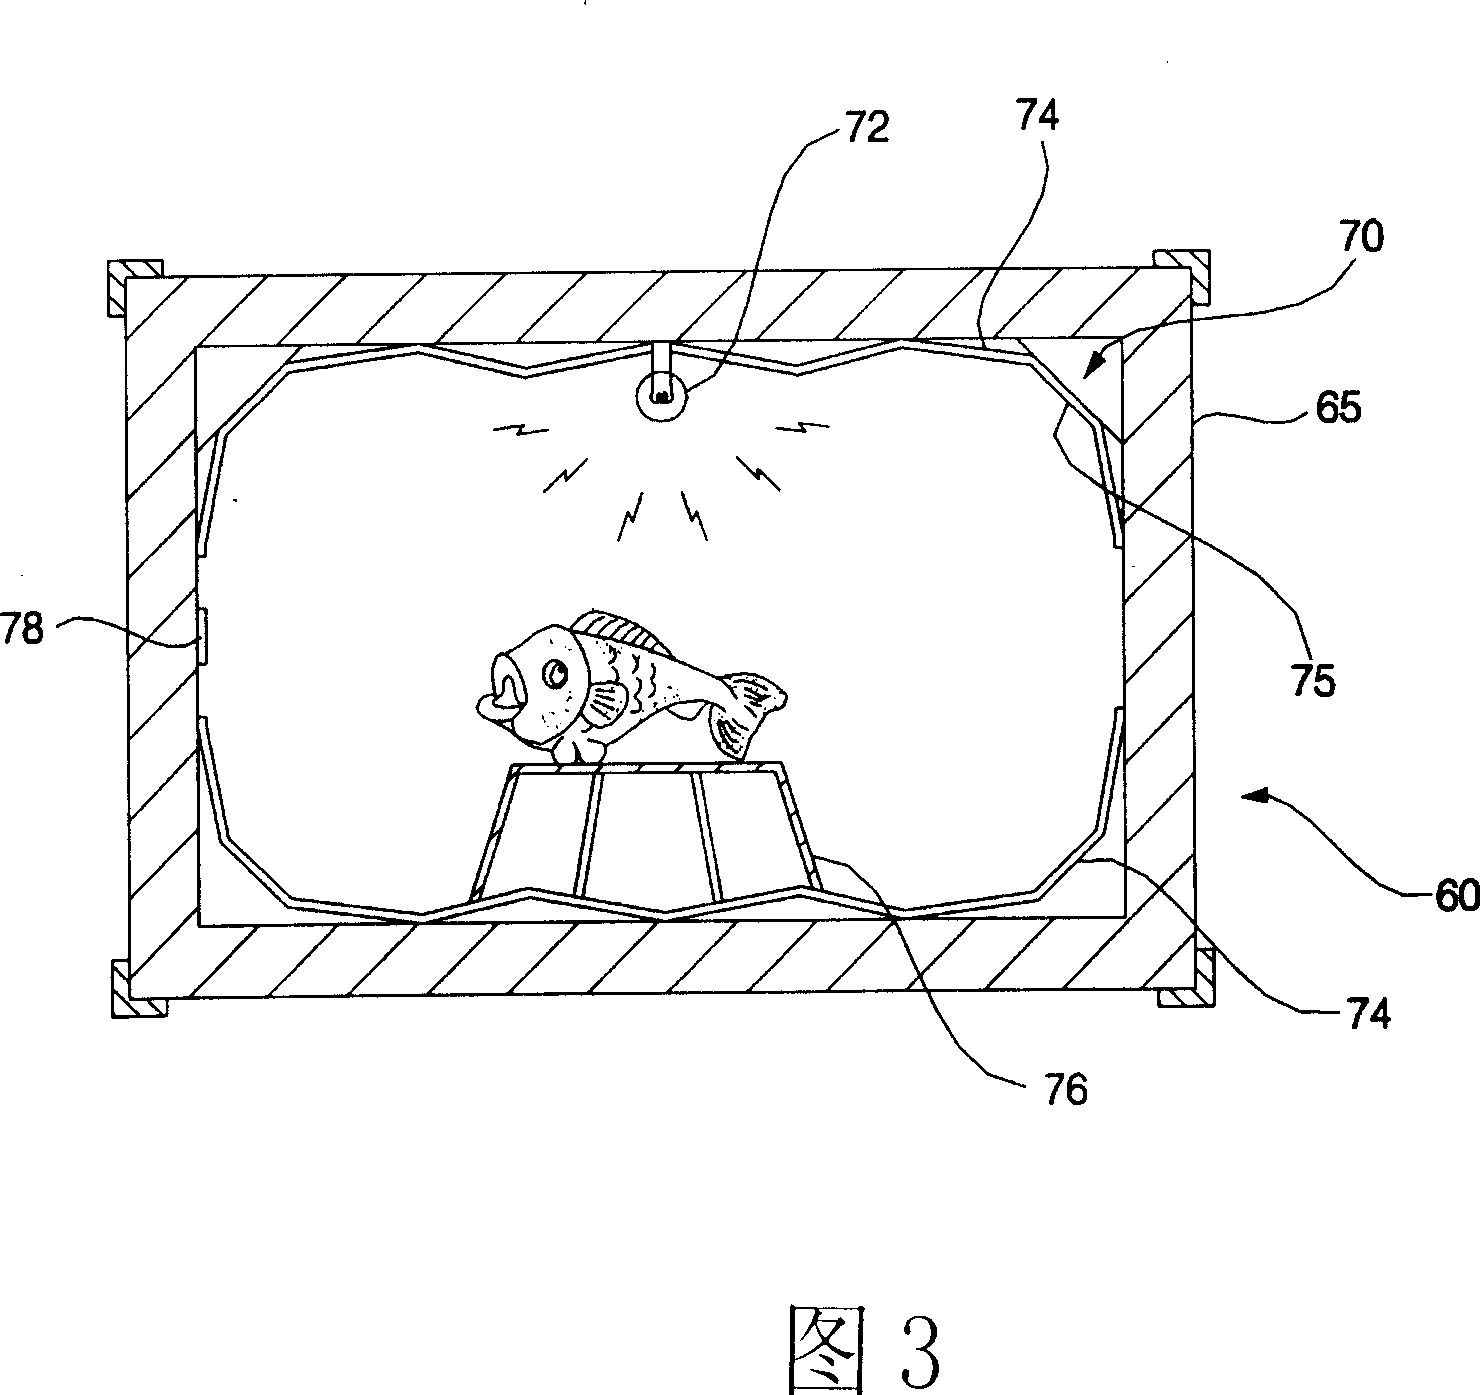 Thawing combined parts for refrigerator and thawing chamber